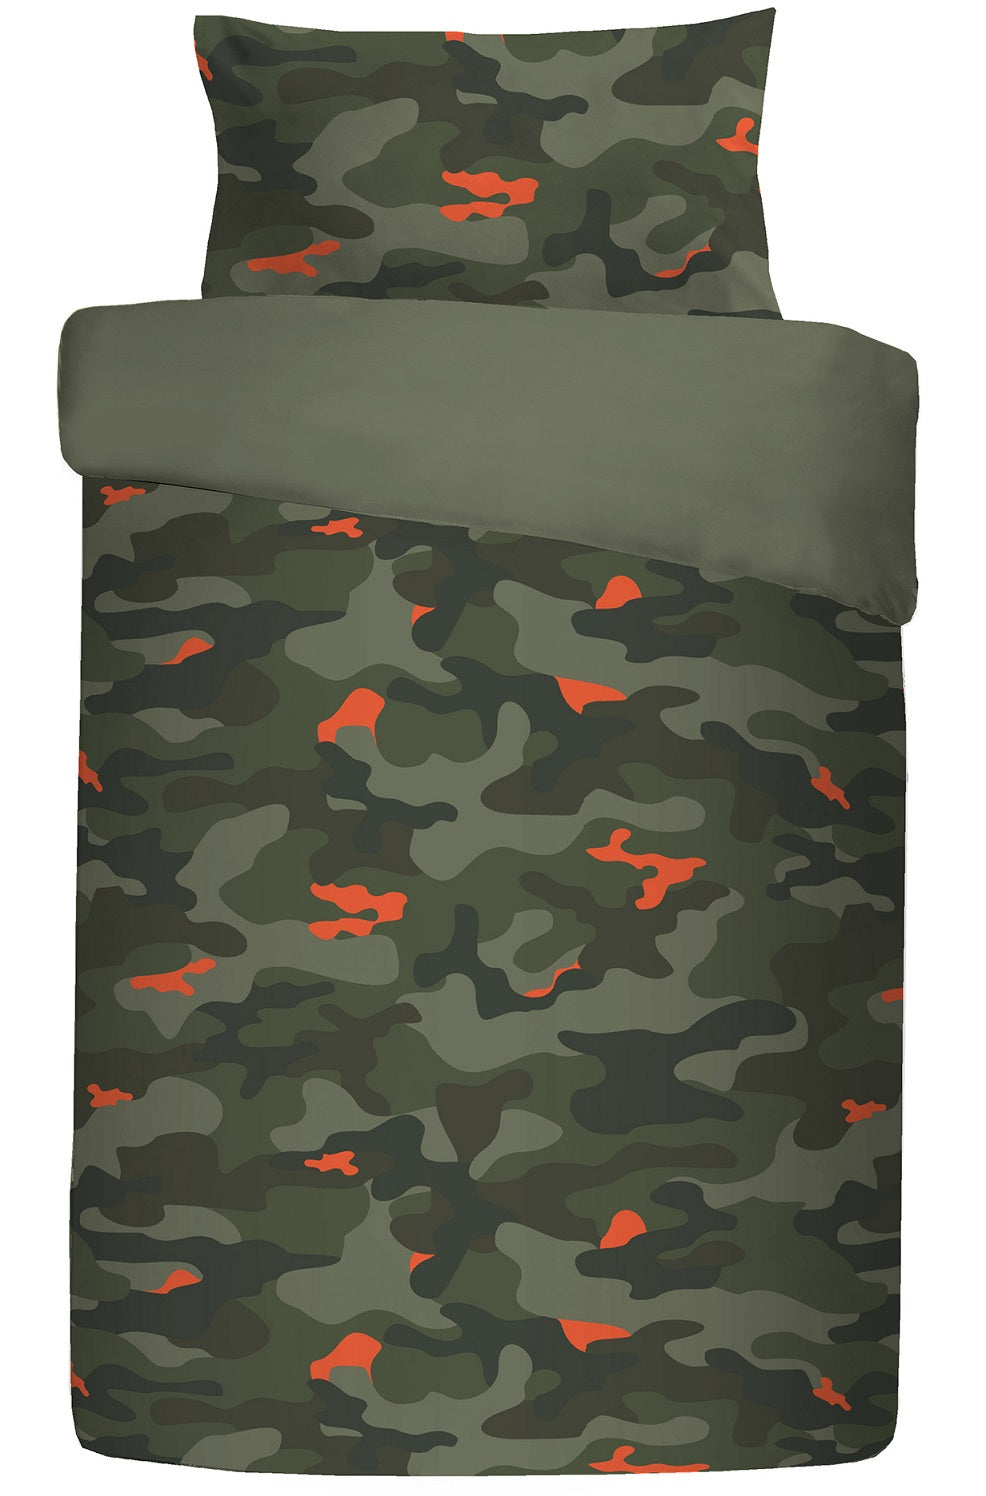 Luxury Army Camouflage Single Duvet Cover Set - Green